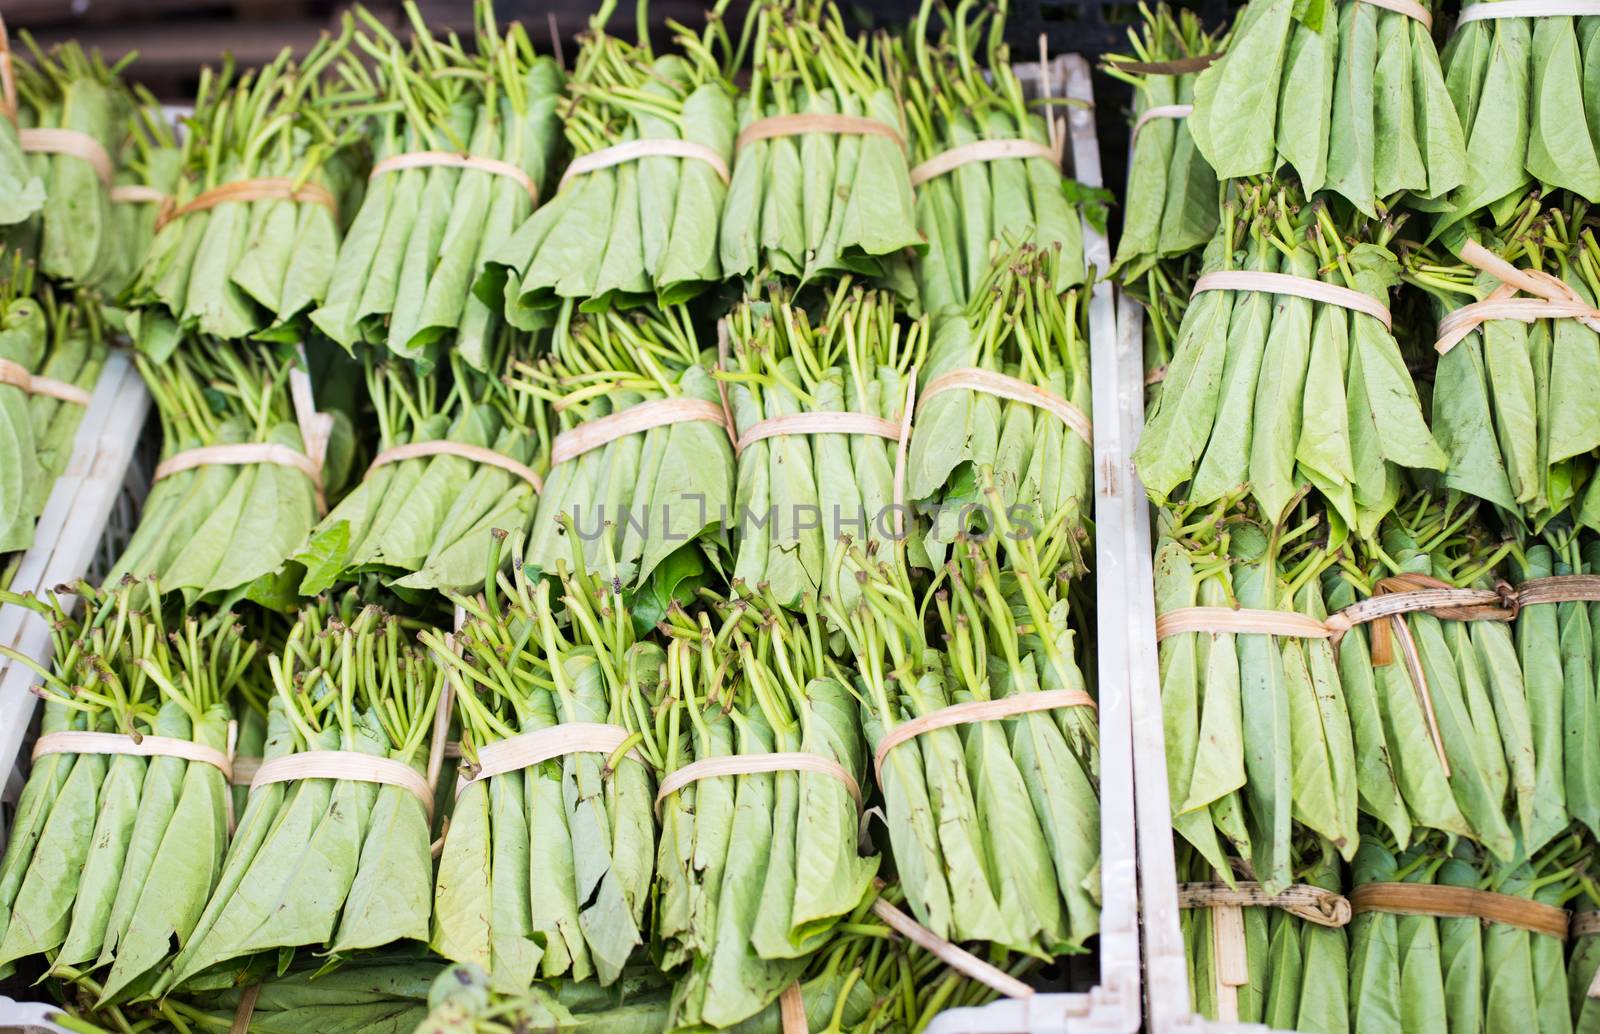 Betel leaves at a market in Myeik, Myanmar. Betel leaves and nuts are mild, addictive drugs widely used in South and Southeast Asia. The drug colours the teeth of the users red. They also have medical uses. Shallow depth of field photo with the first row of leaves in focus.